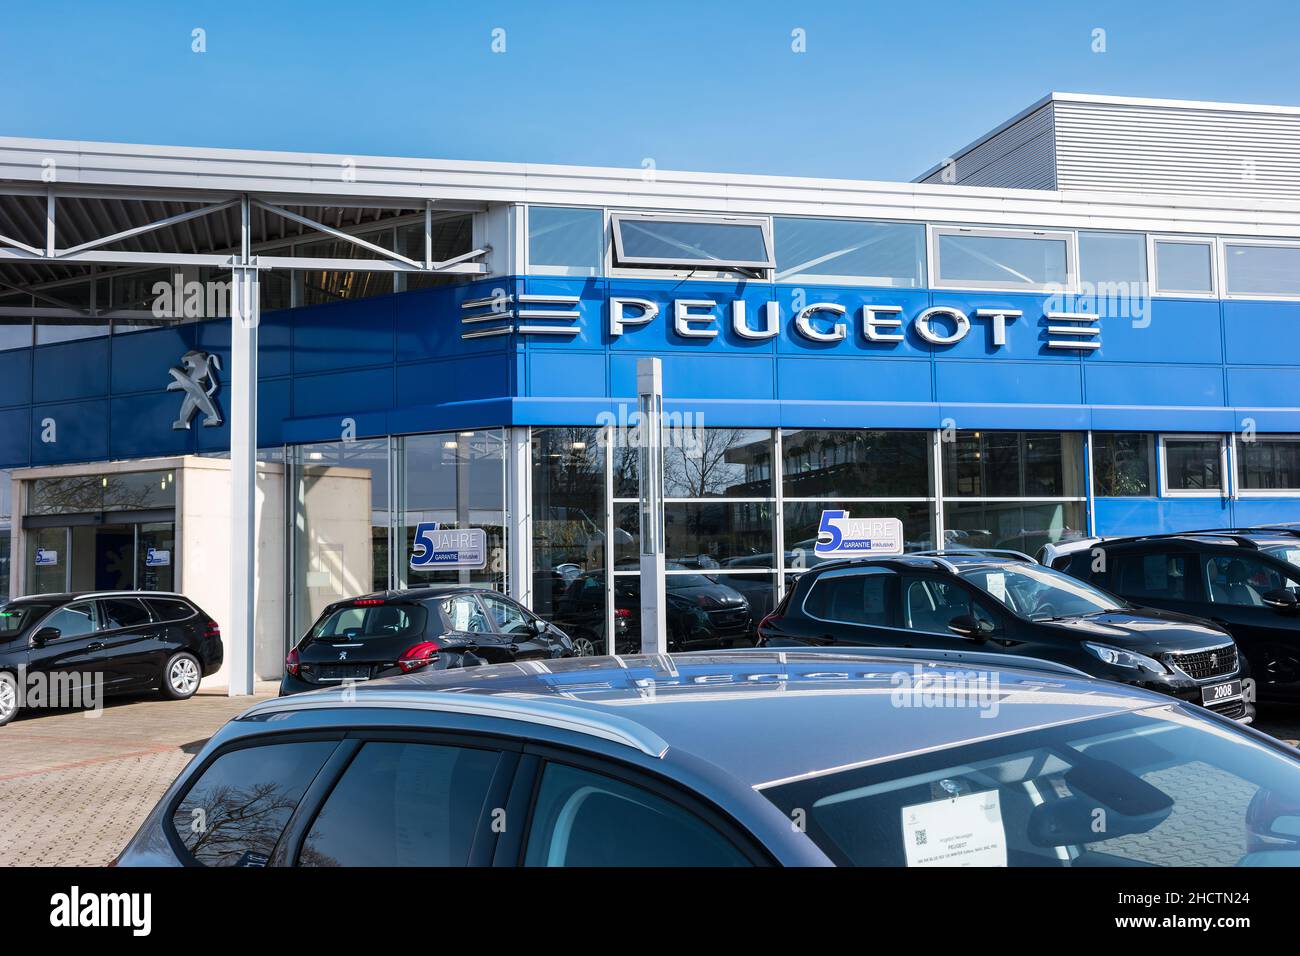 Office of official Peugeot dealer. Peugeot is a French automobile manufacturer and part of Groupe PSA. Stock Photo